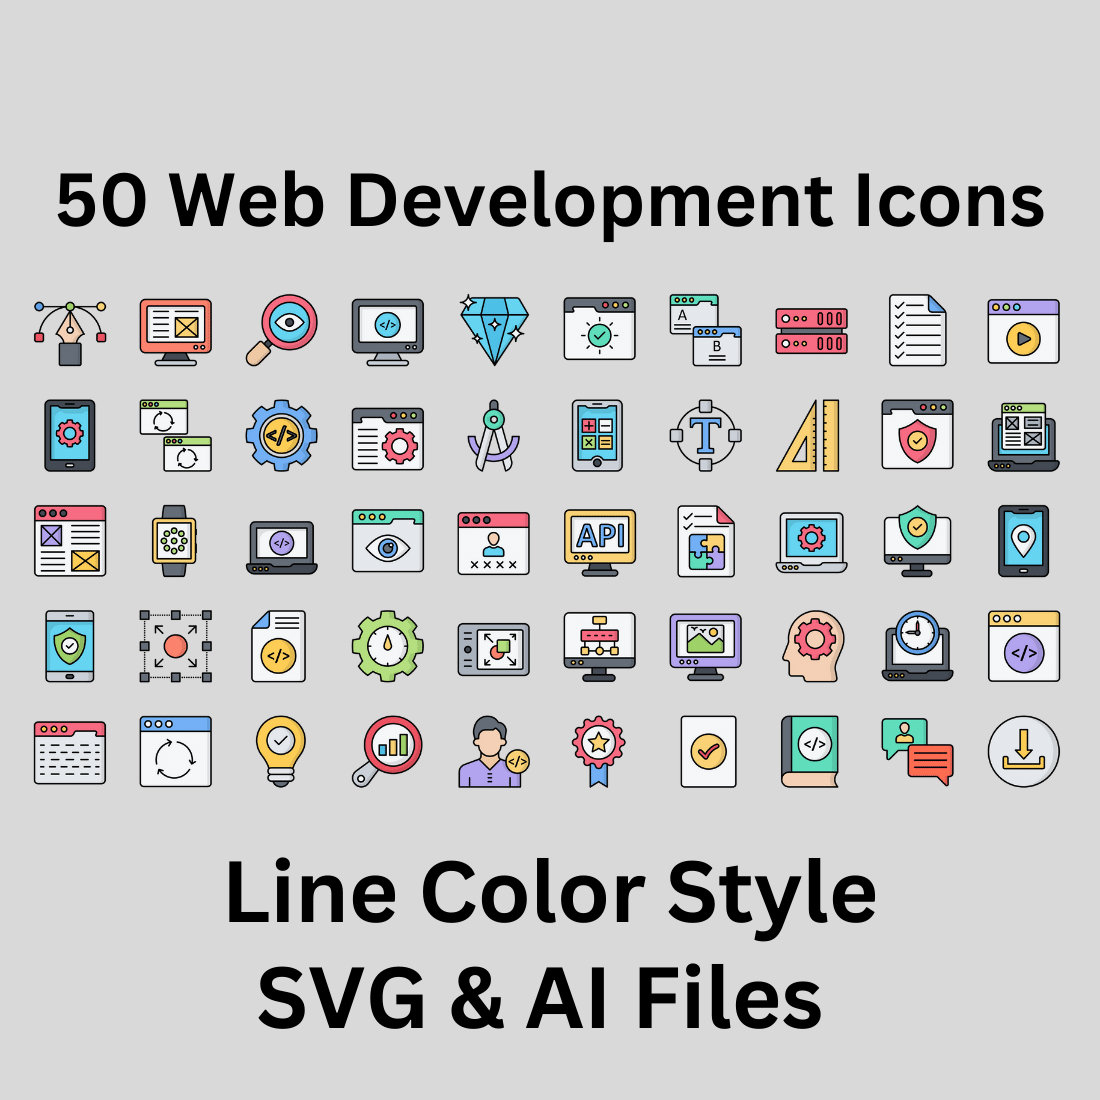 Web Development Icon Set 50 Line Color Icons - SVG And AI Files preview image.